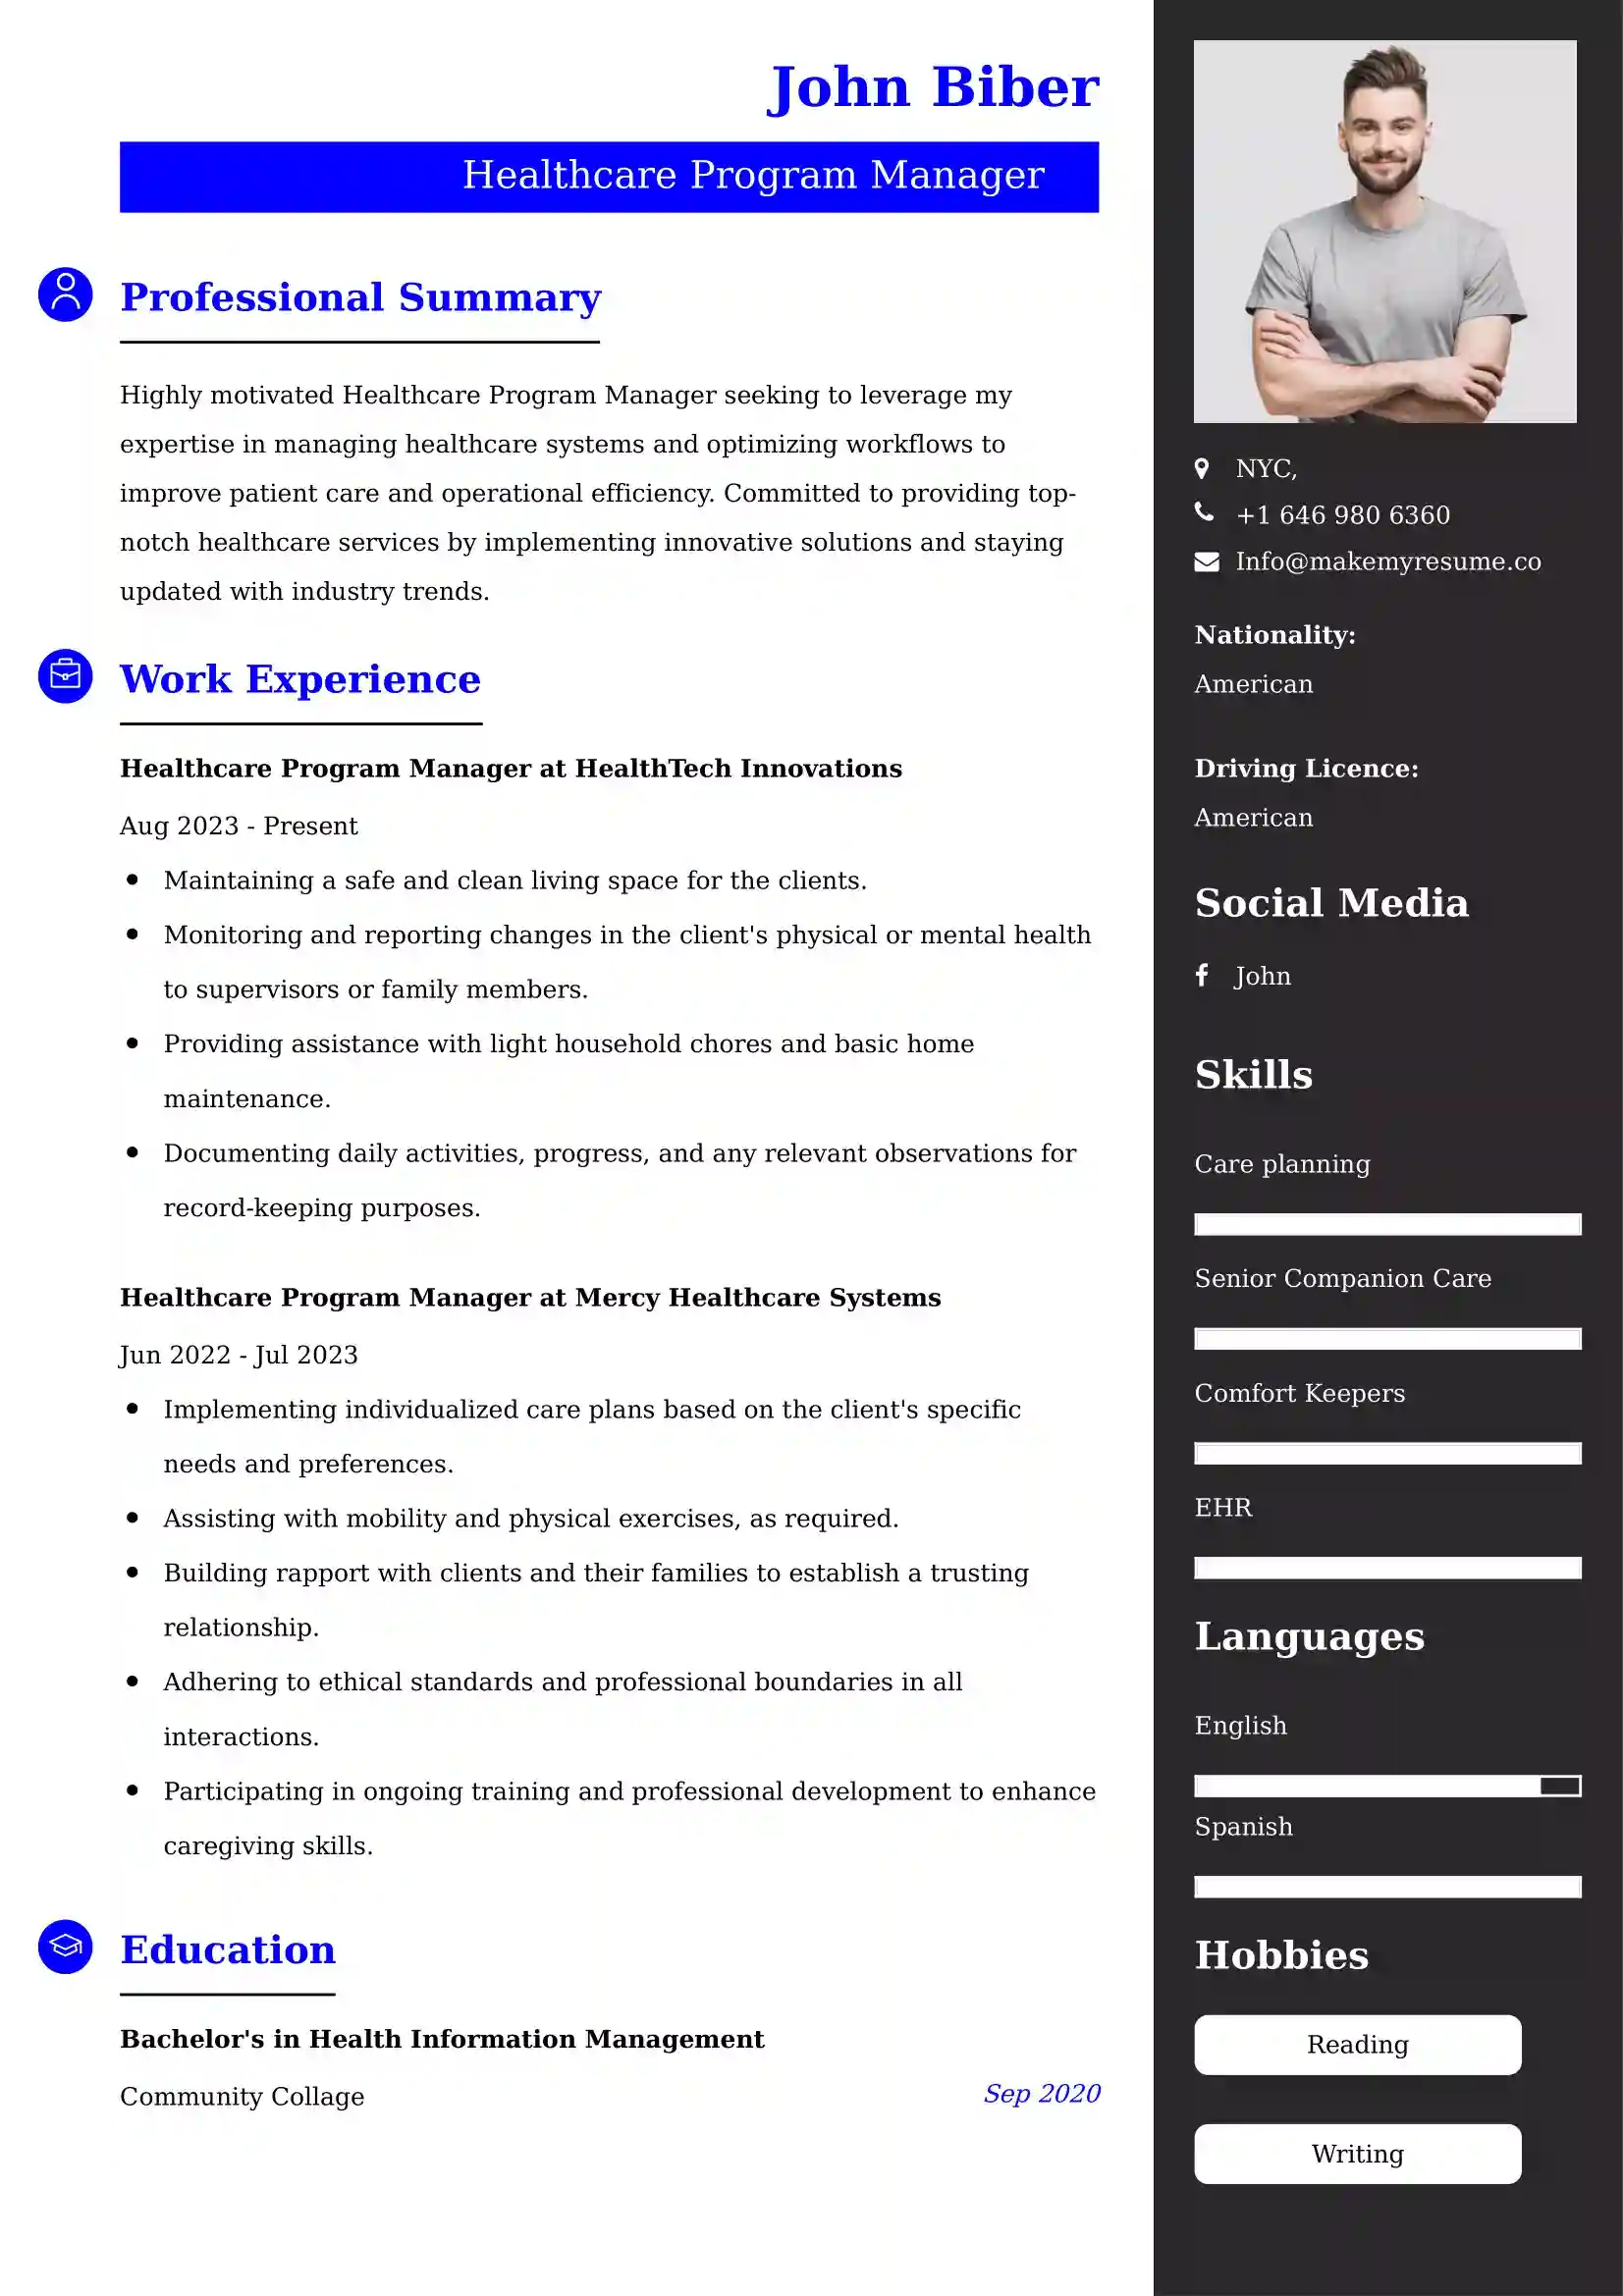 Healthcare Program Manager Resume Examples - Australian Format and Tips